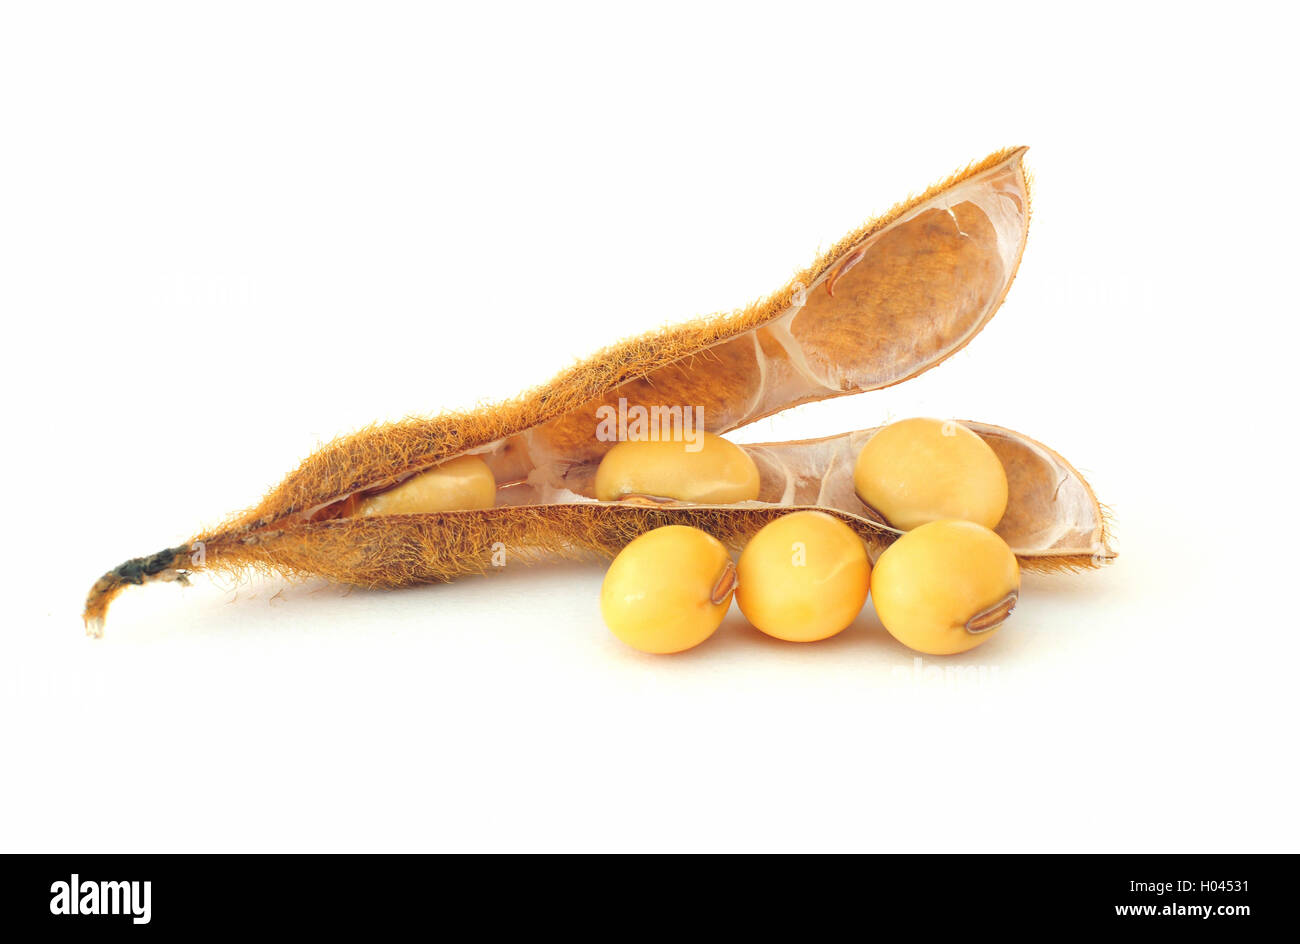 Soy bean seeds on a white background Stock Photo